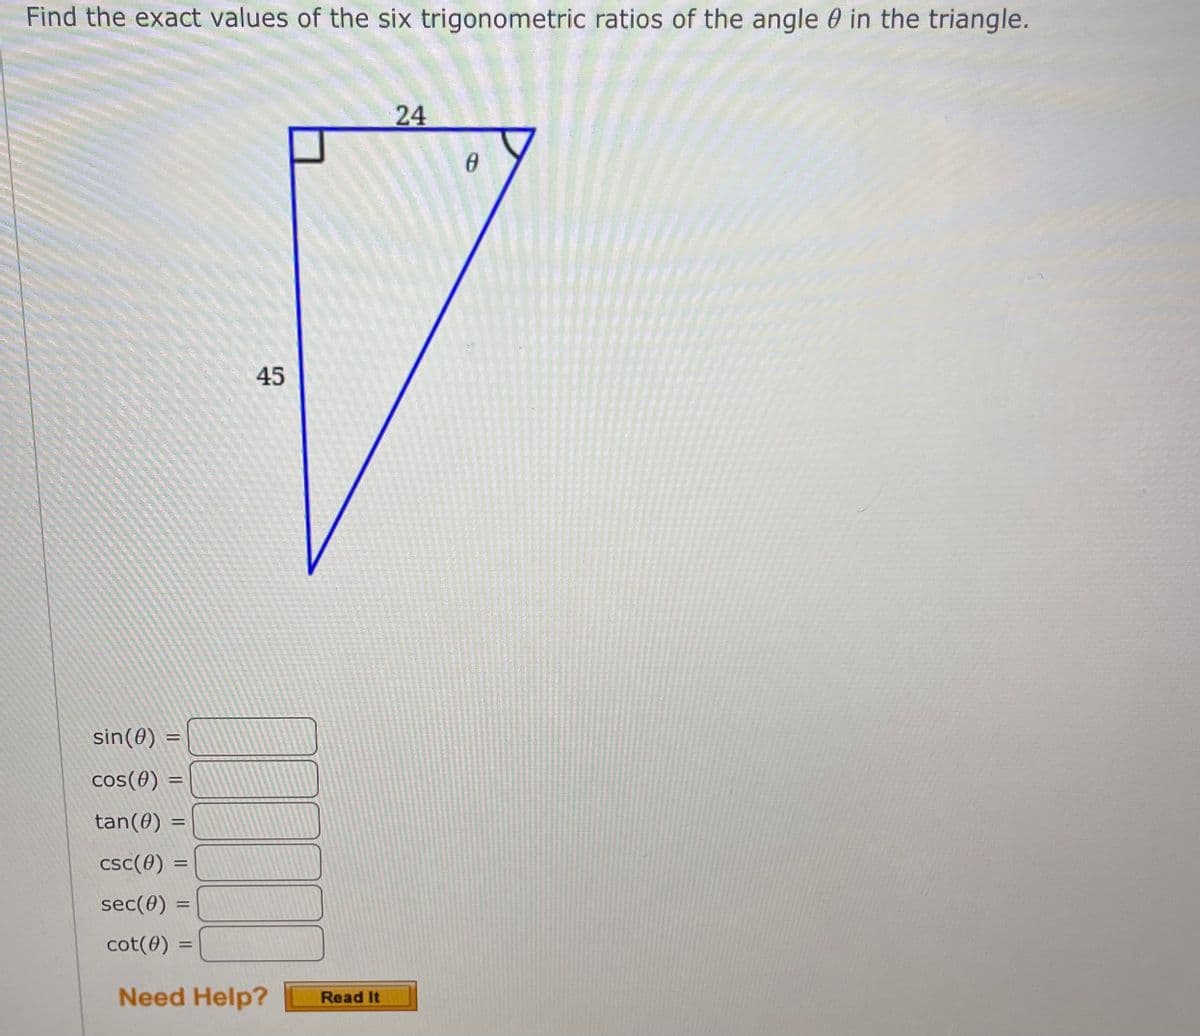 Find the exact values of the six trigonometric ratios of the angle 0 in the triangle.
24
45
sin(0) =
cos(0)
%3D
tan(0) =
csc(0)
sec(0) =
cot(0)
%3D
Need Help?
Read It
